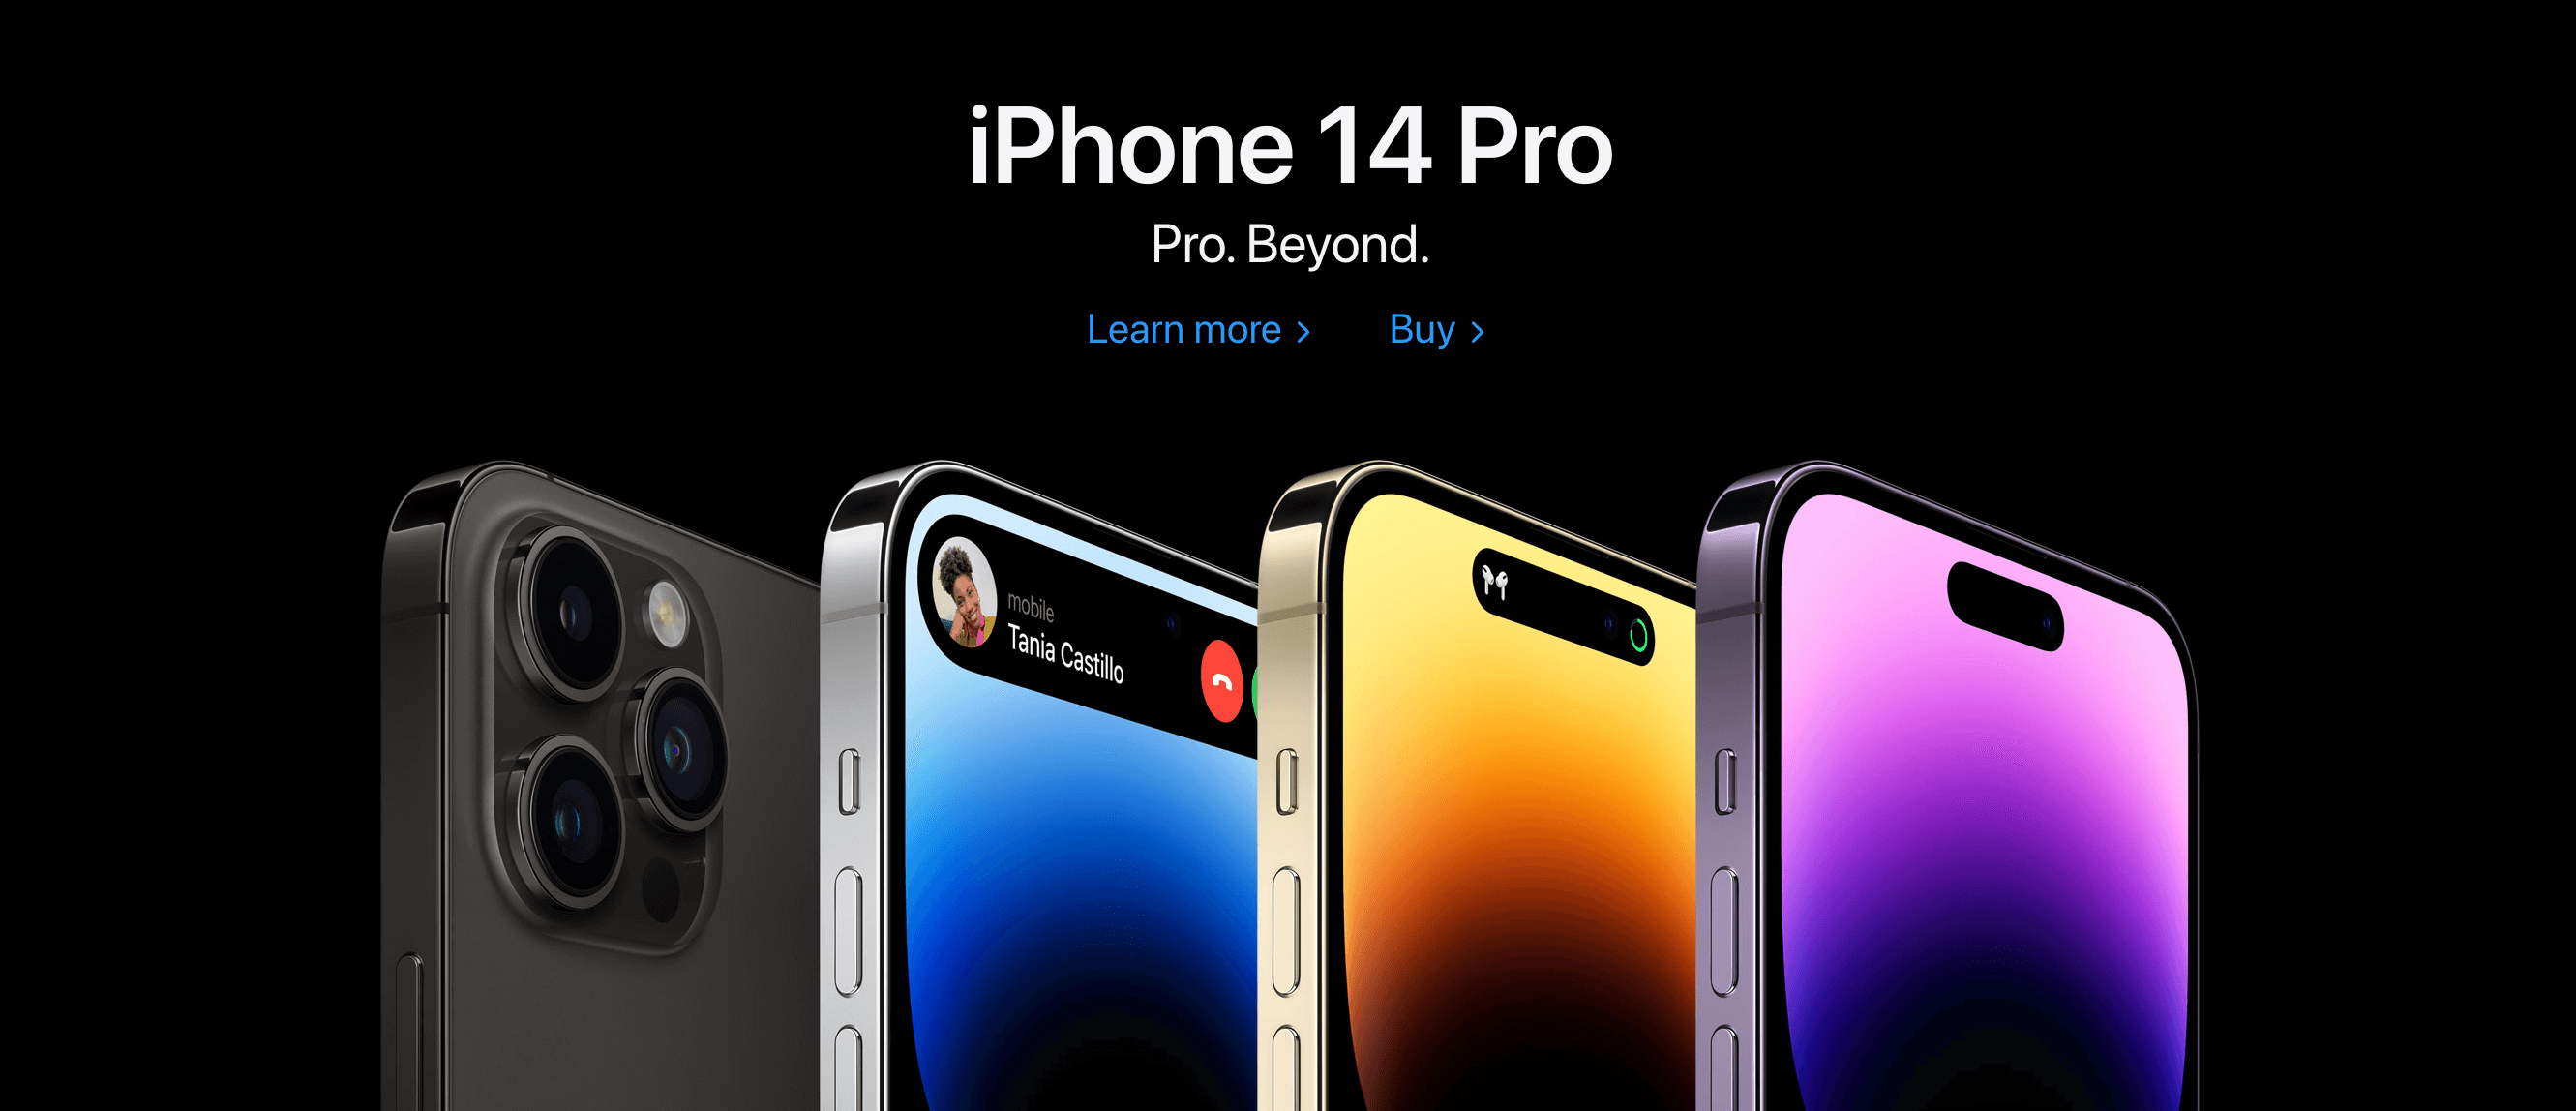 Storytelling Brands–Apple’s homepage showing an image of 4 iPhone 14 Pros, standing side by side. 